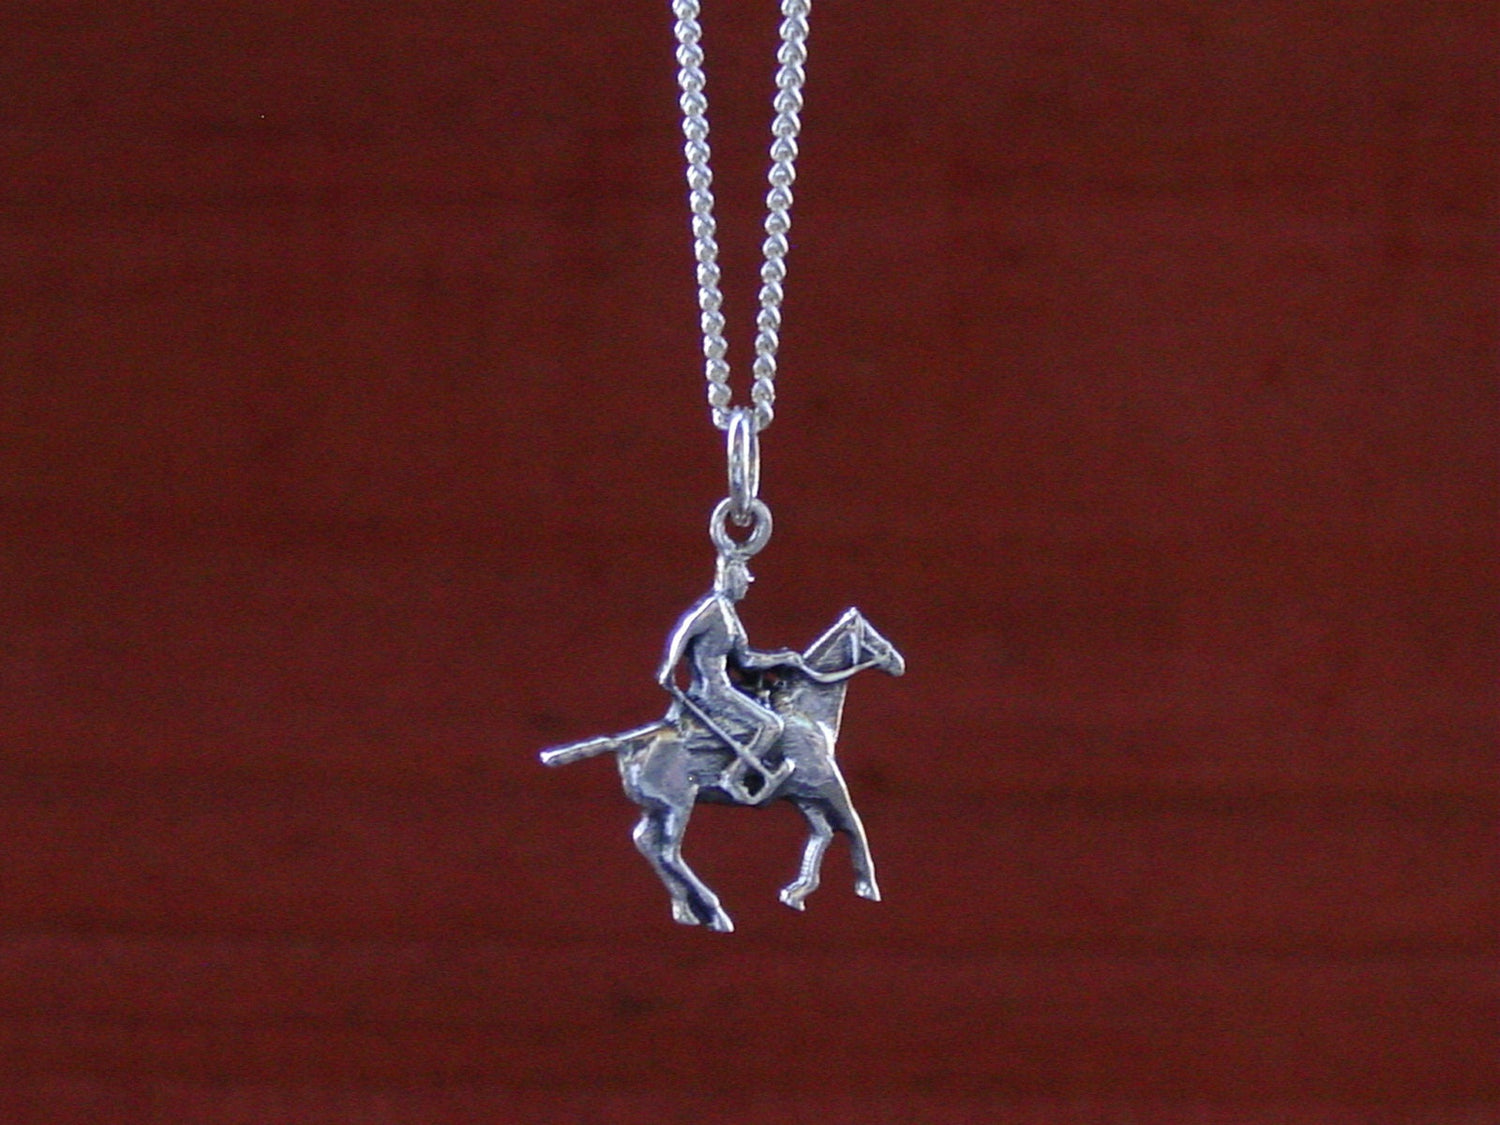 polo horse and player jewelry